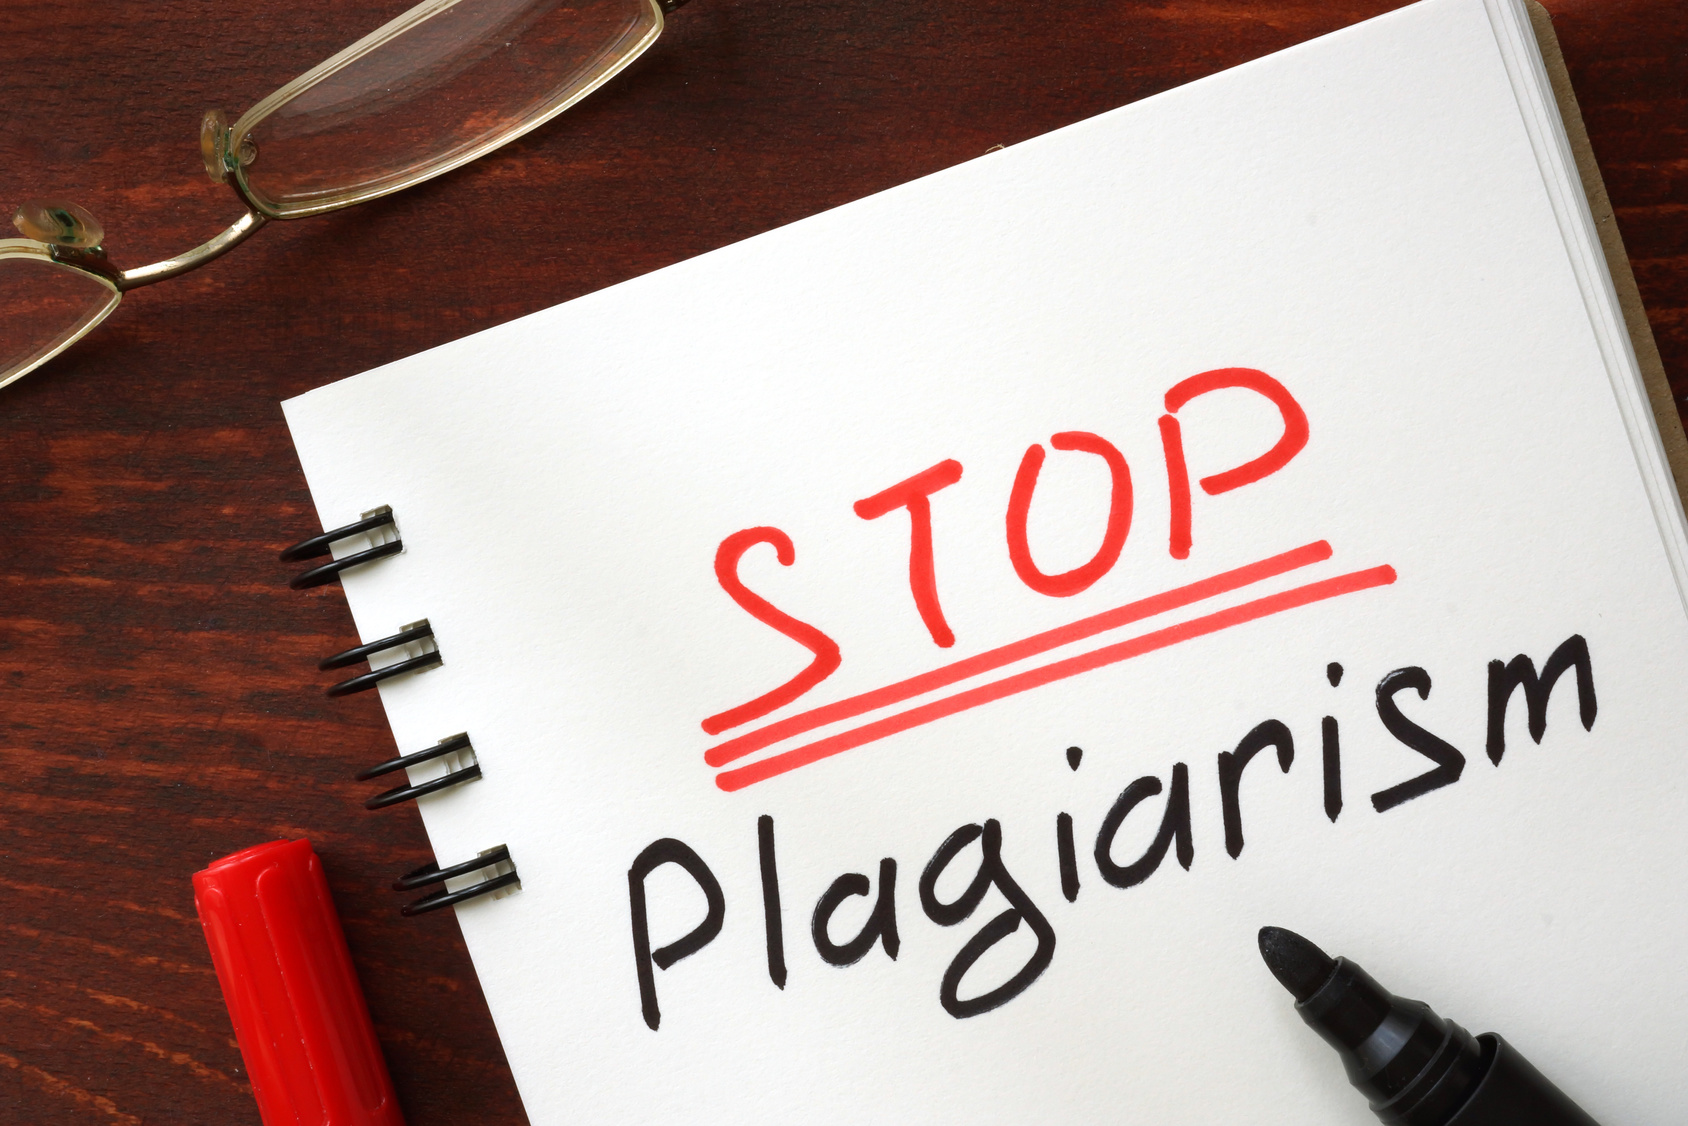 how to avoid plagiarism in research paper pdf